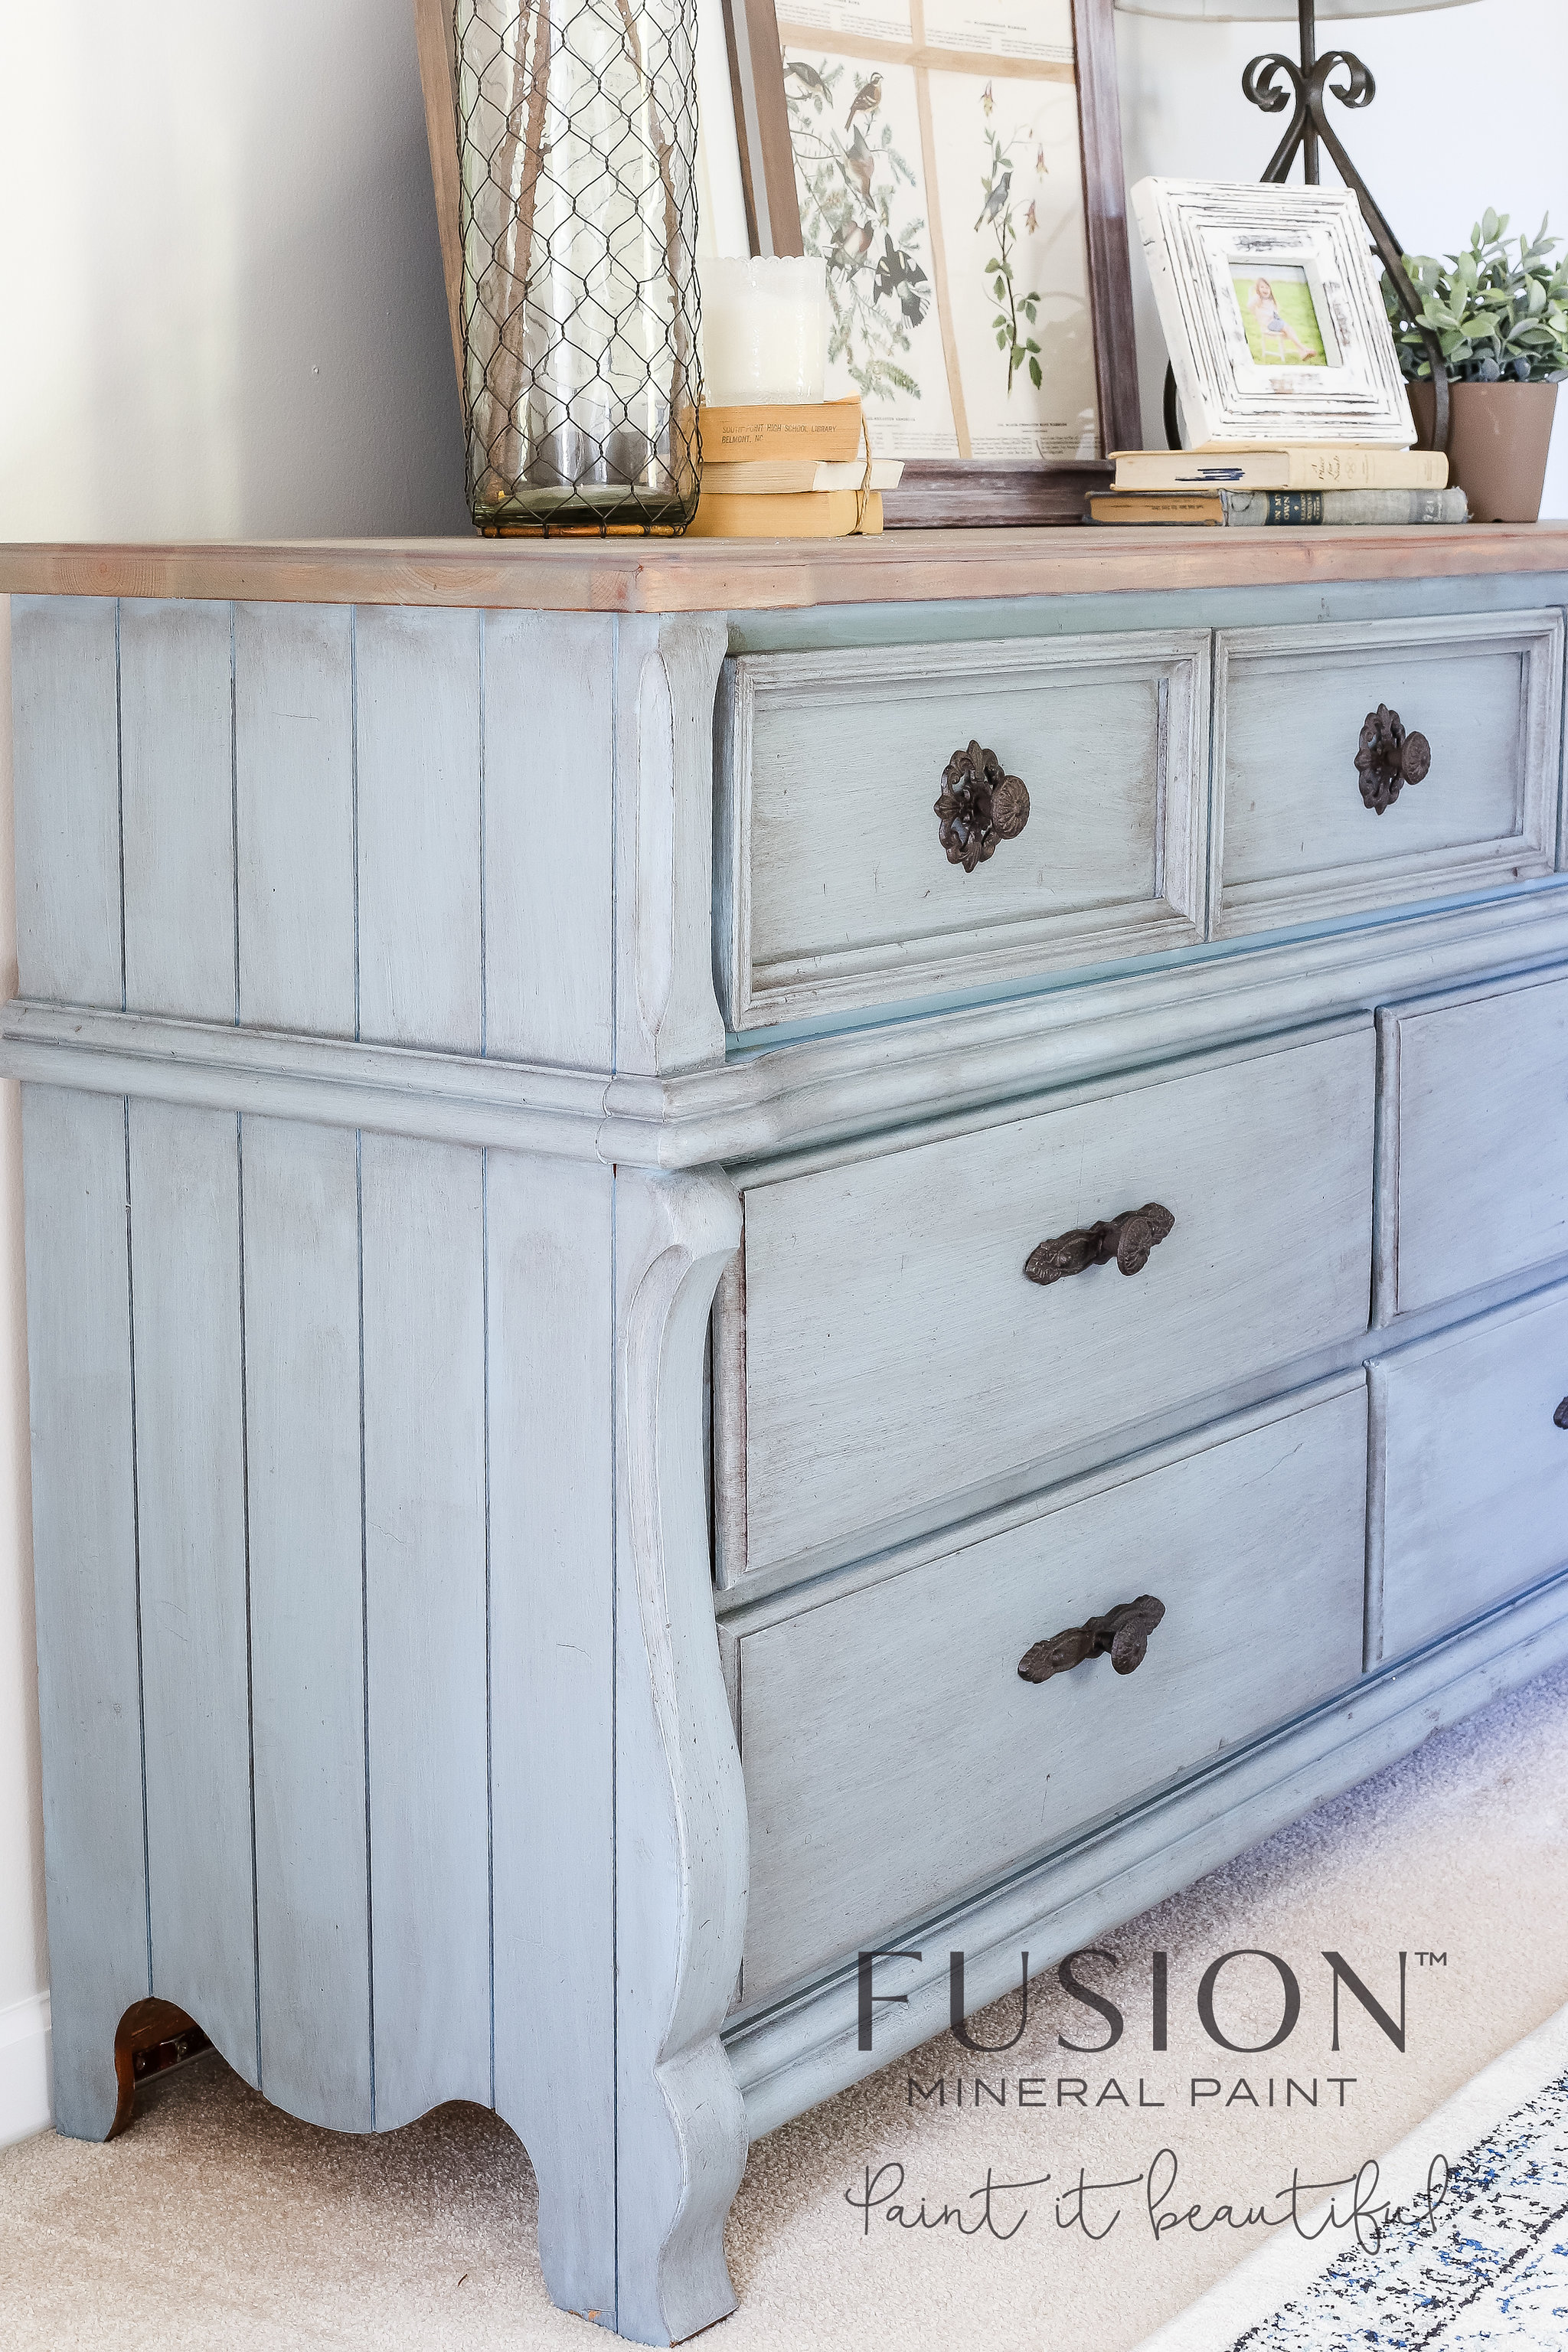 When and How to use Antique Glaze or Dark Wax on your Painted